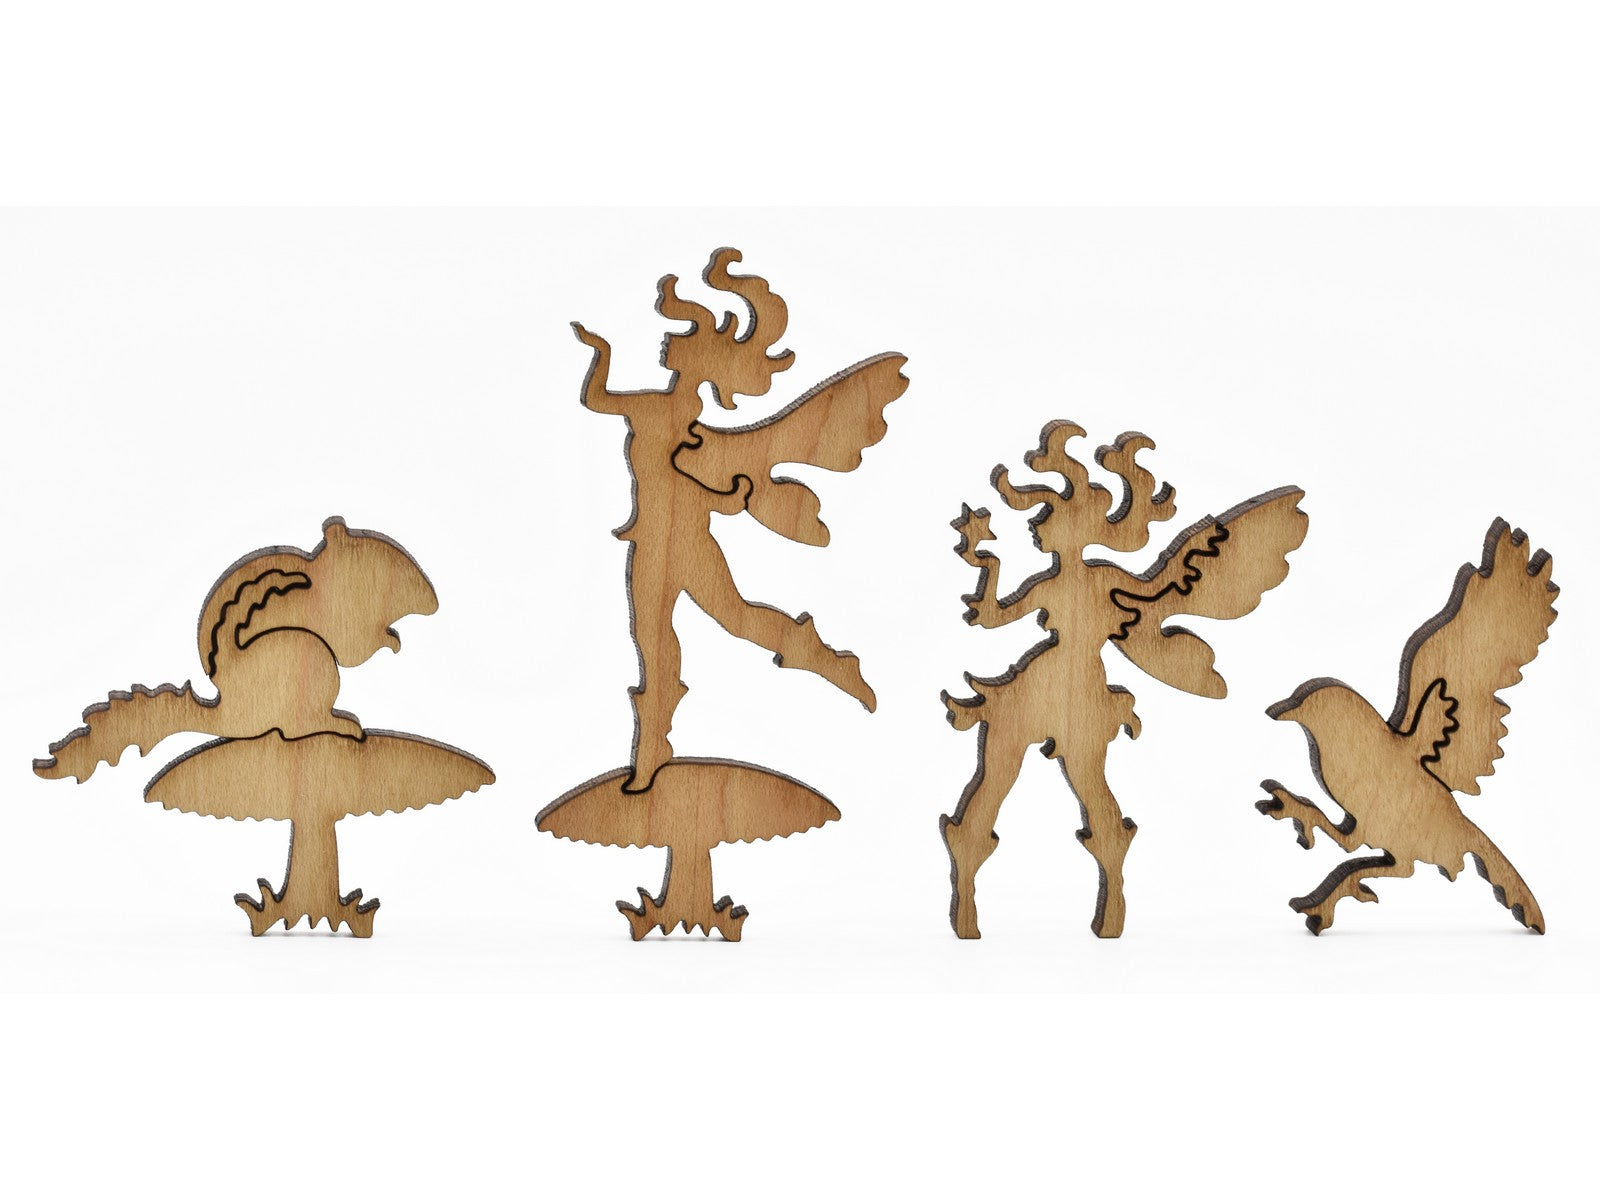 A closeup of pieces in the shape of fairies and mushrooms.